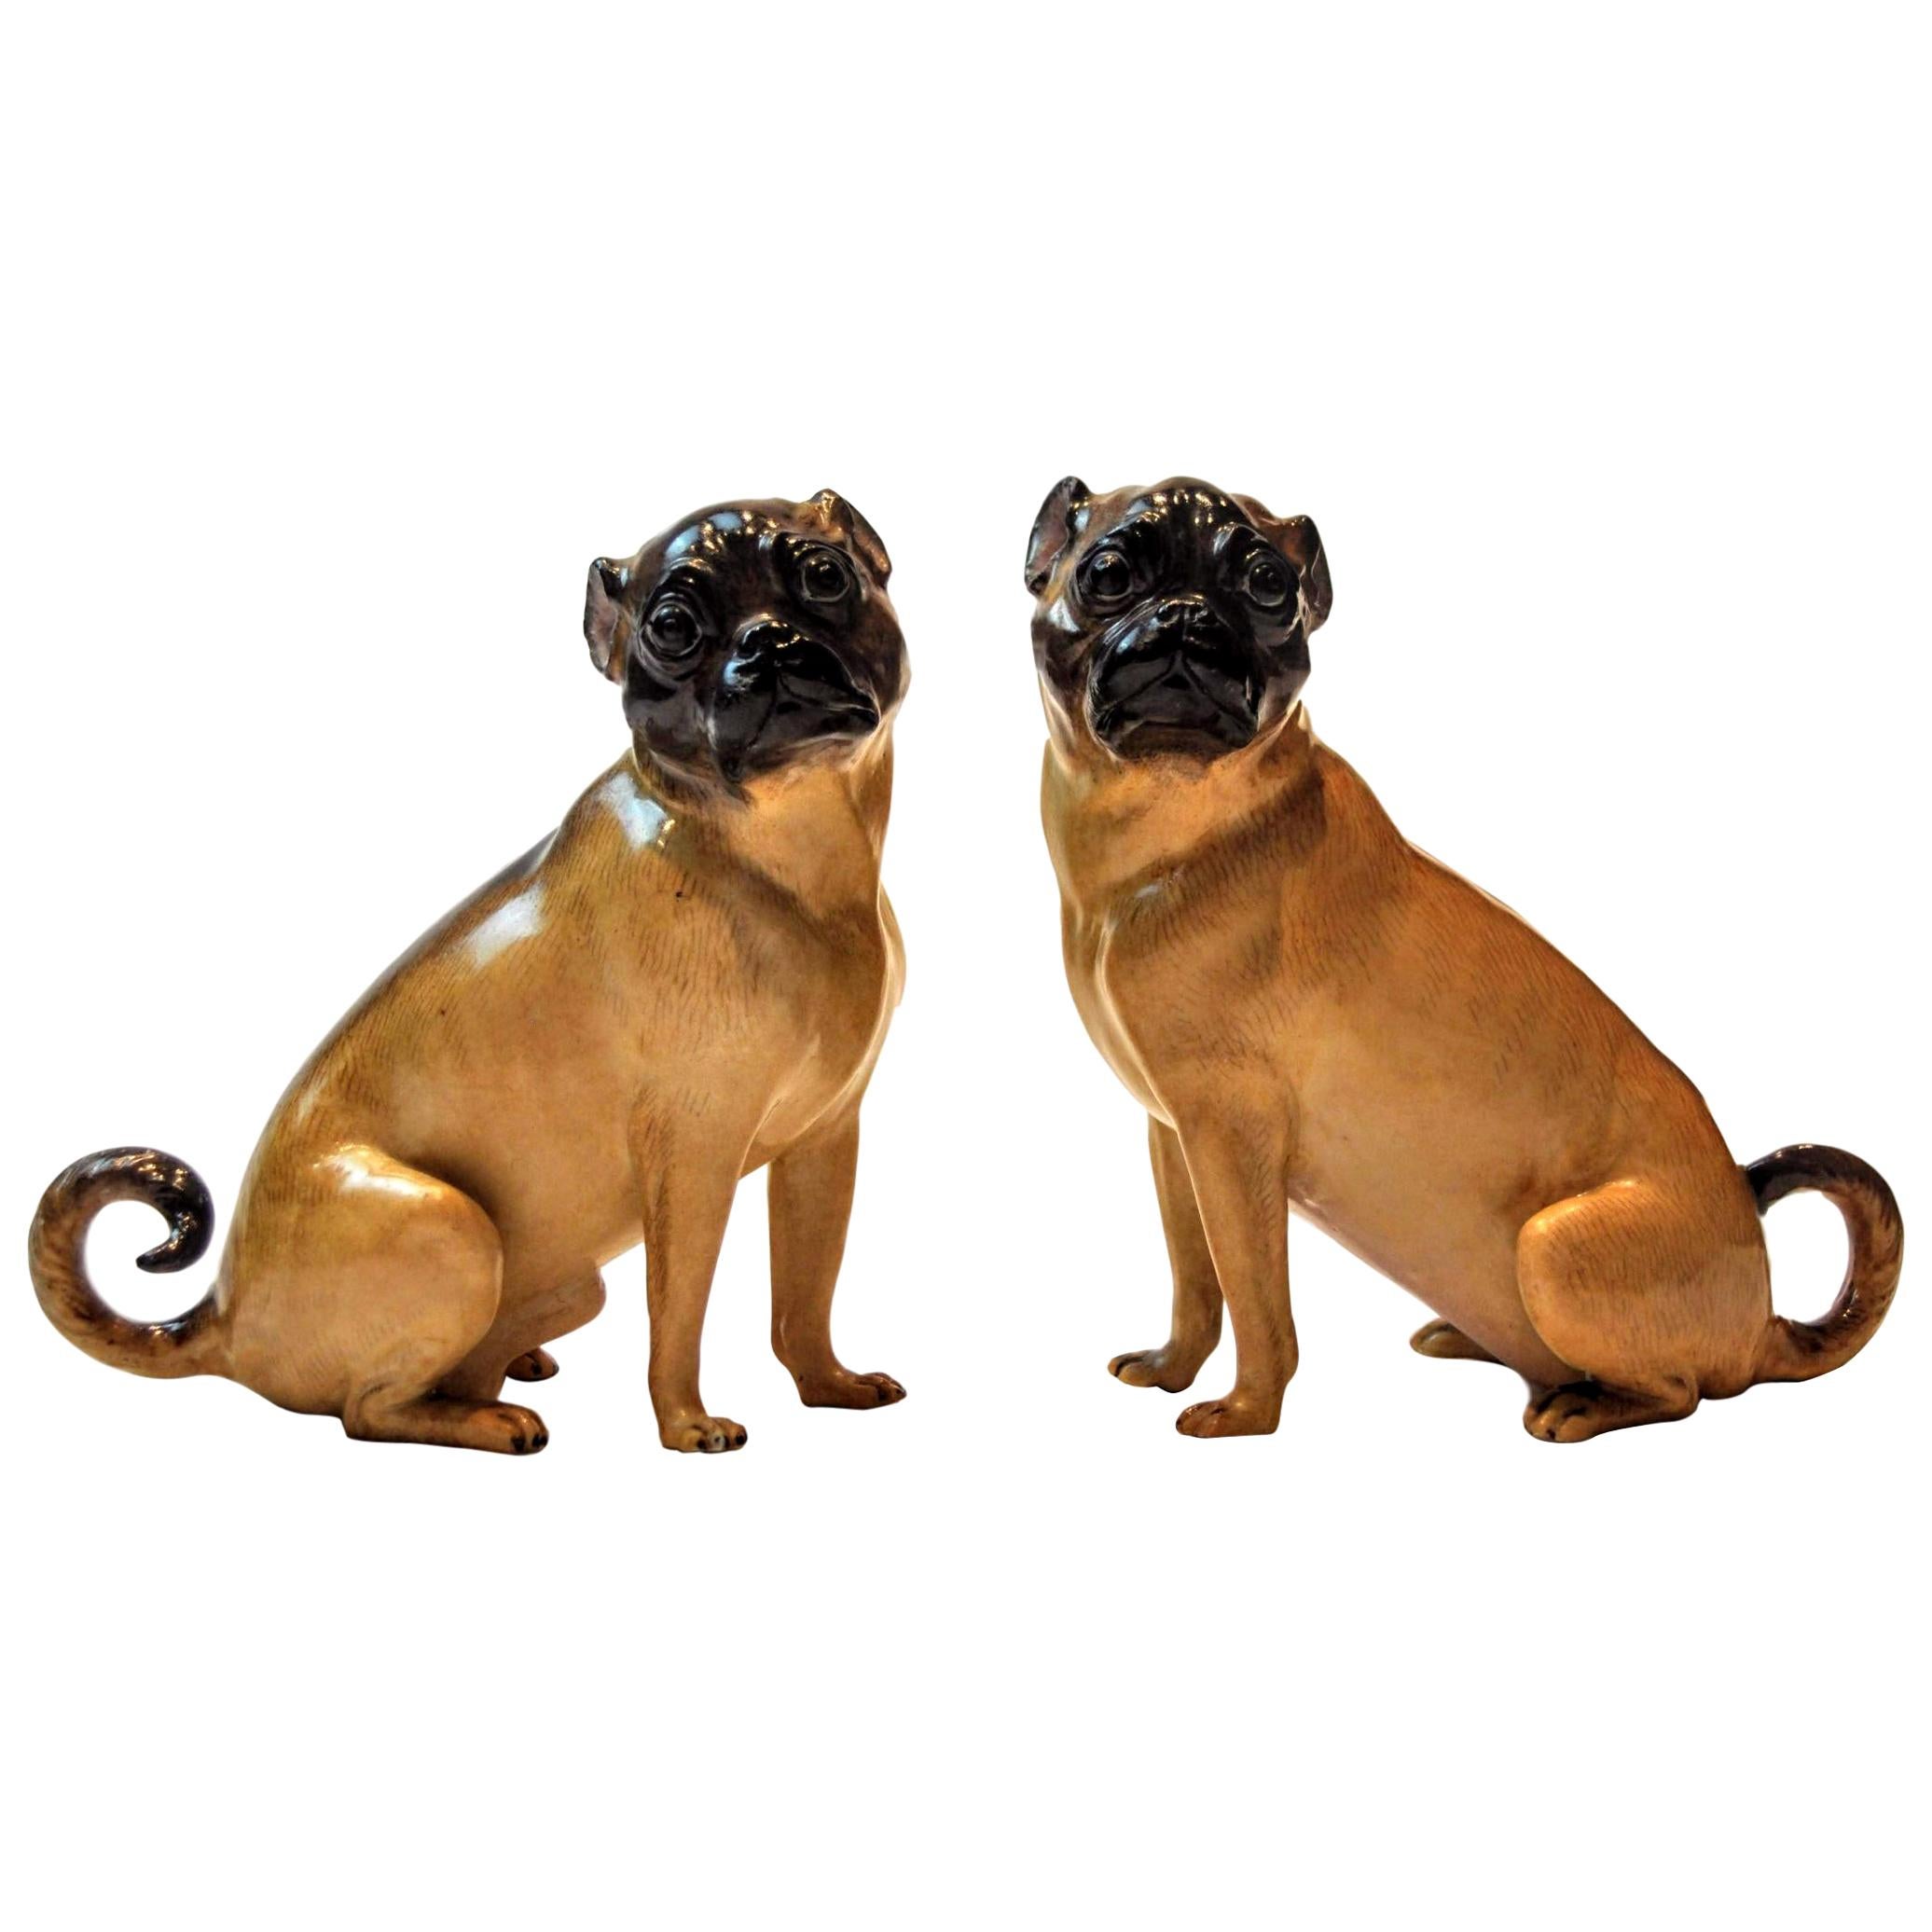 19th Century Pair of Meissen Porcelain Figures of Pug Dogs, Germany